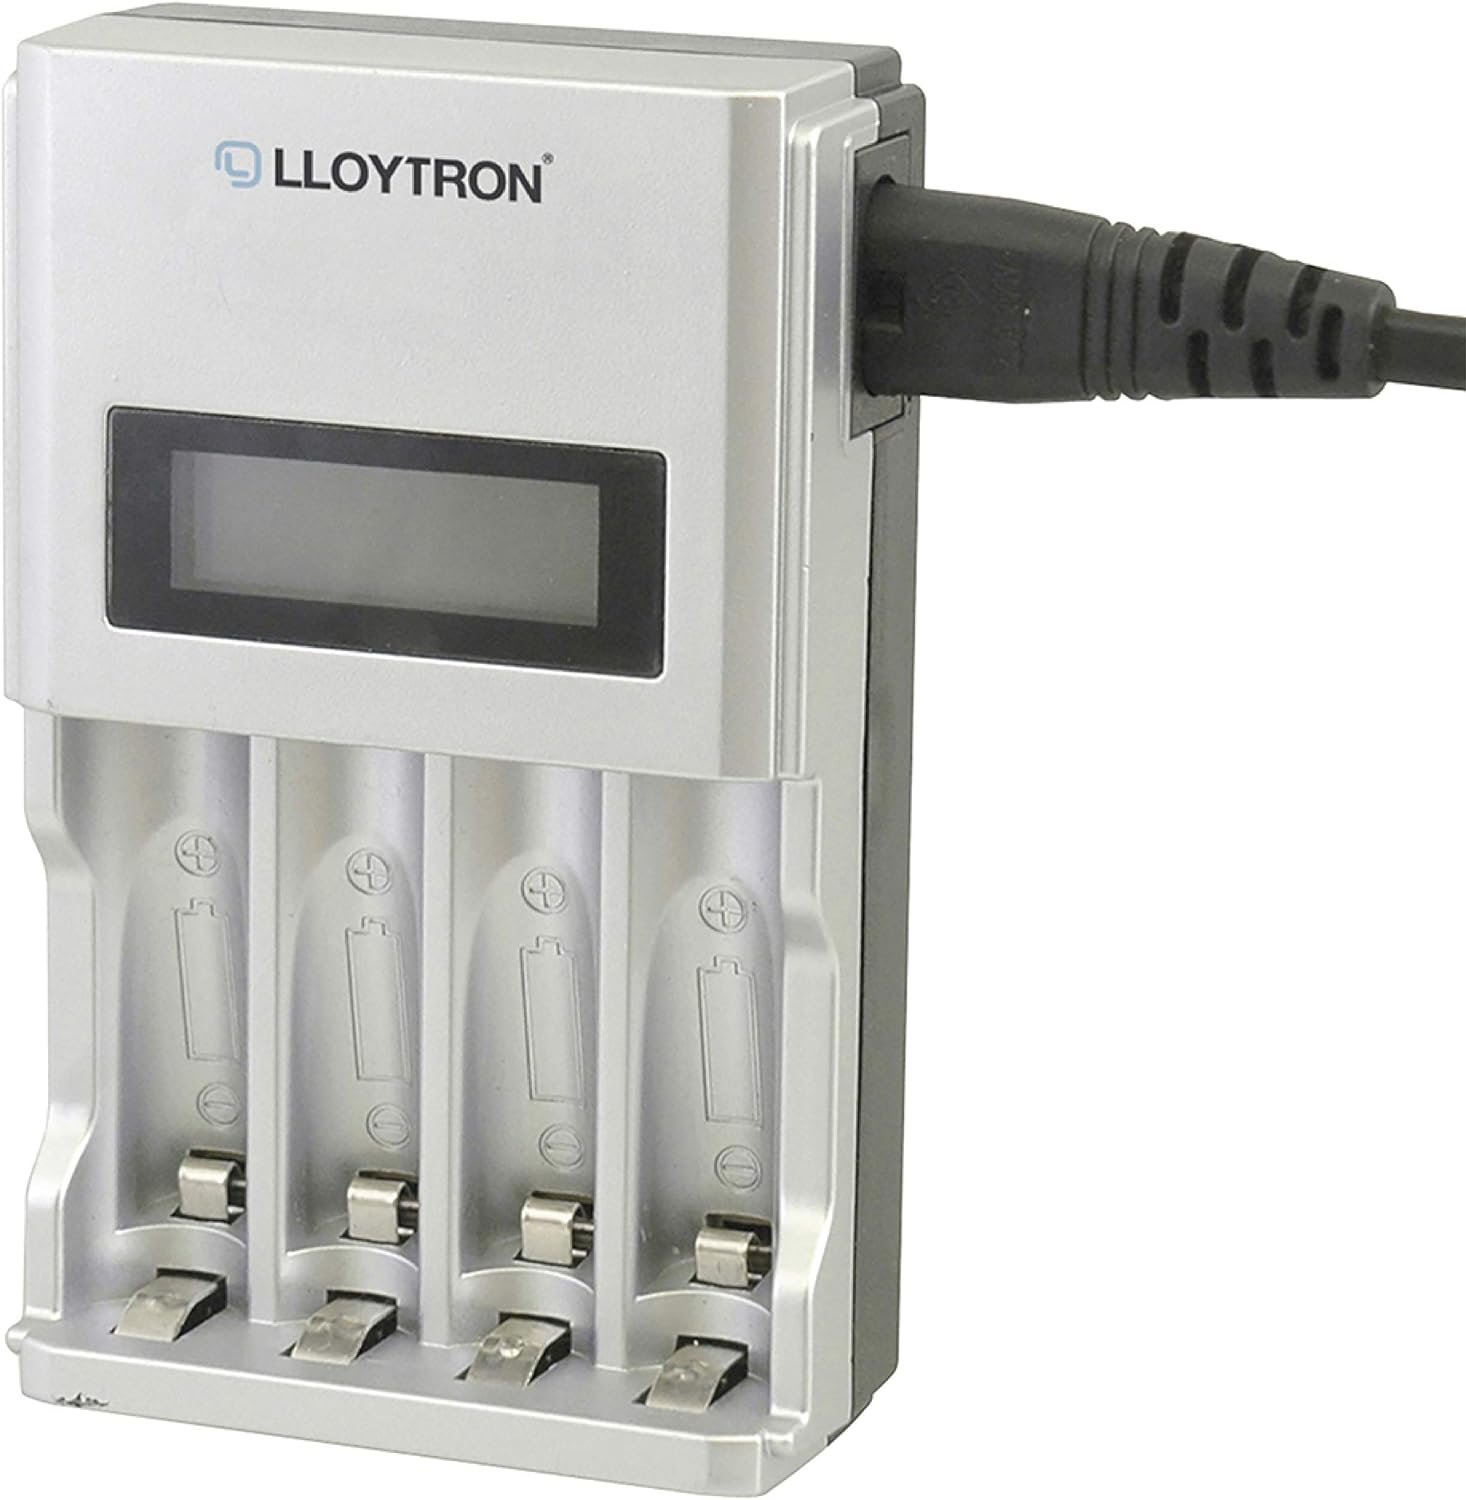 LLOYTRON LCD BATTERY CHARGER